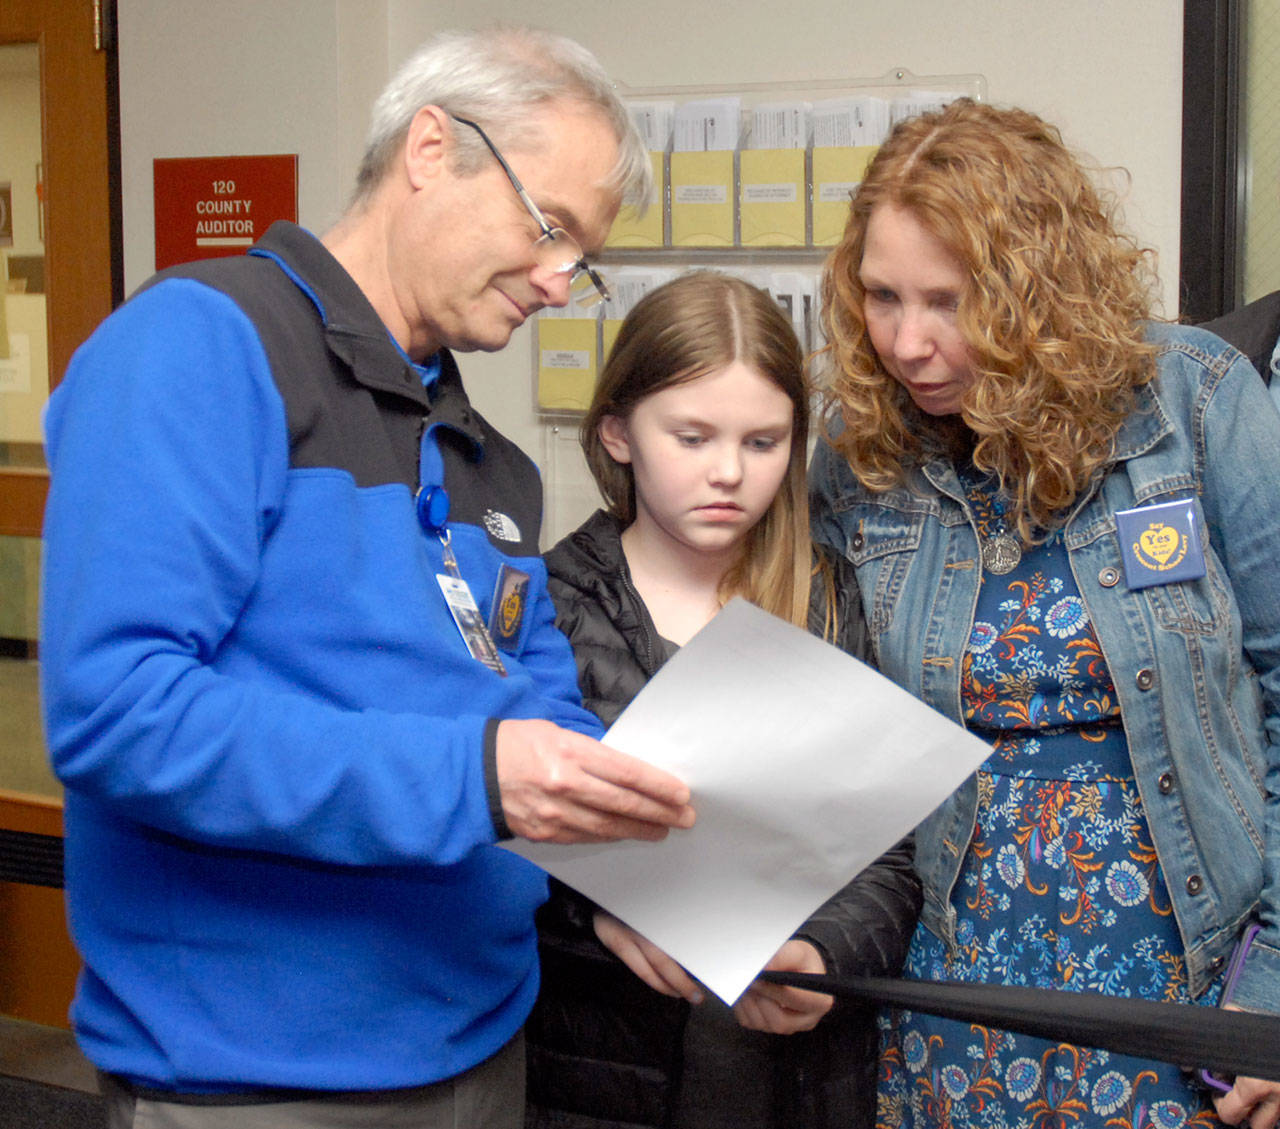 Crescent School Superintendent Dave Bingham, left, looks over election results with school board member Susan Hopper and her daughter, Mariah Hopper, 10, Tuesday night at the Clallam County Courthouse. (Keith Thorpe/Peninsula Daily News)